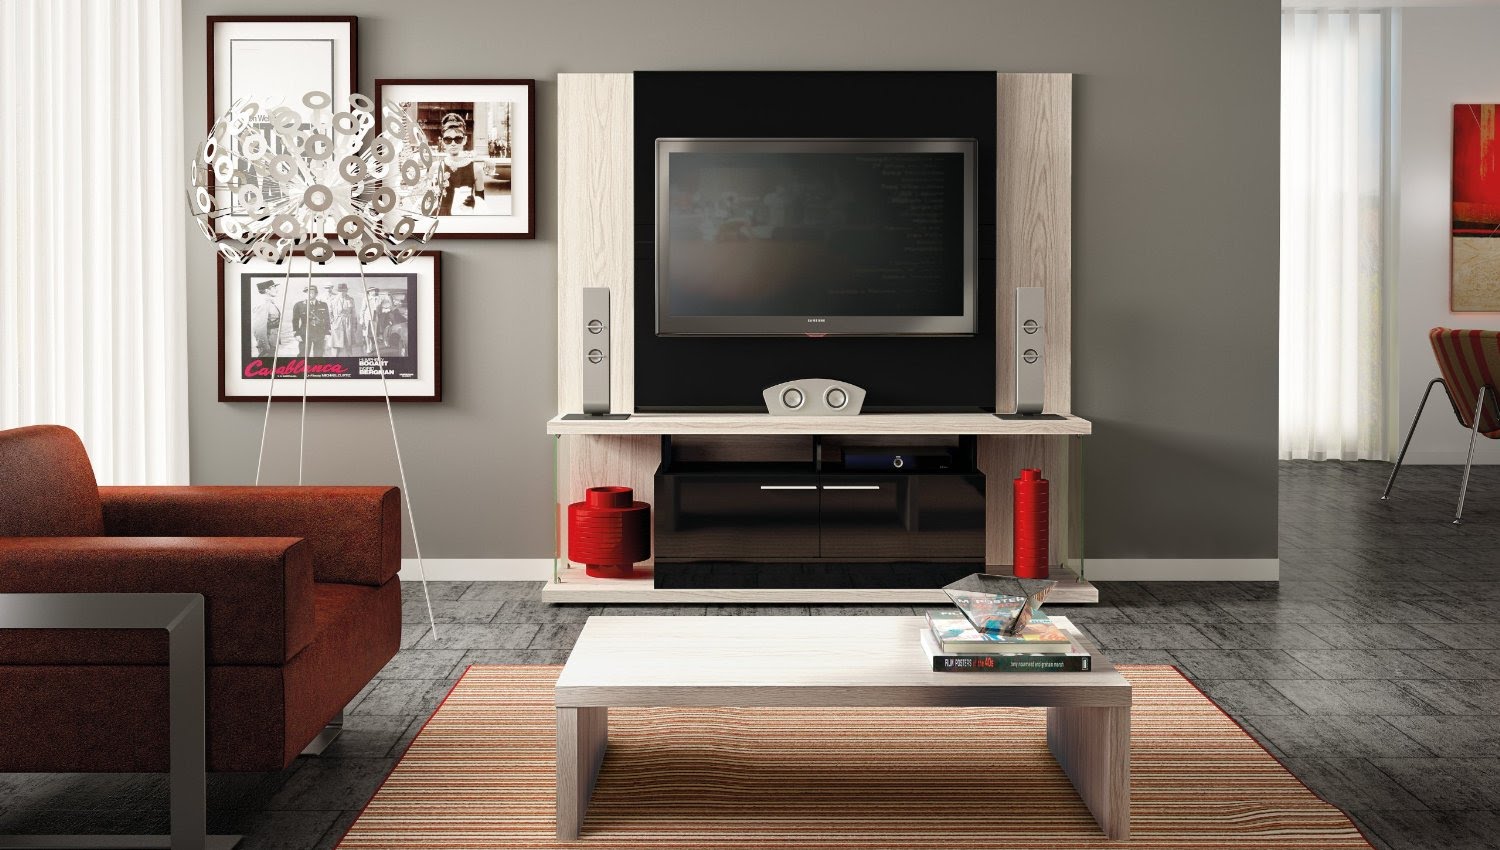 Bobs Fireplace Tv Stand Awesome Beautiful Home theater Entertainment Centers Furniture